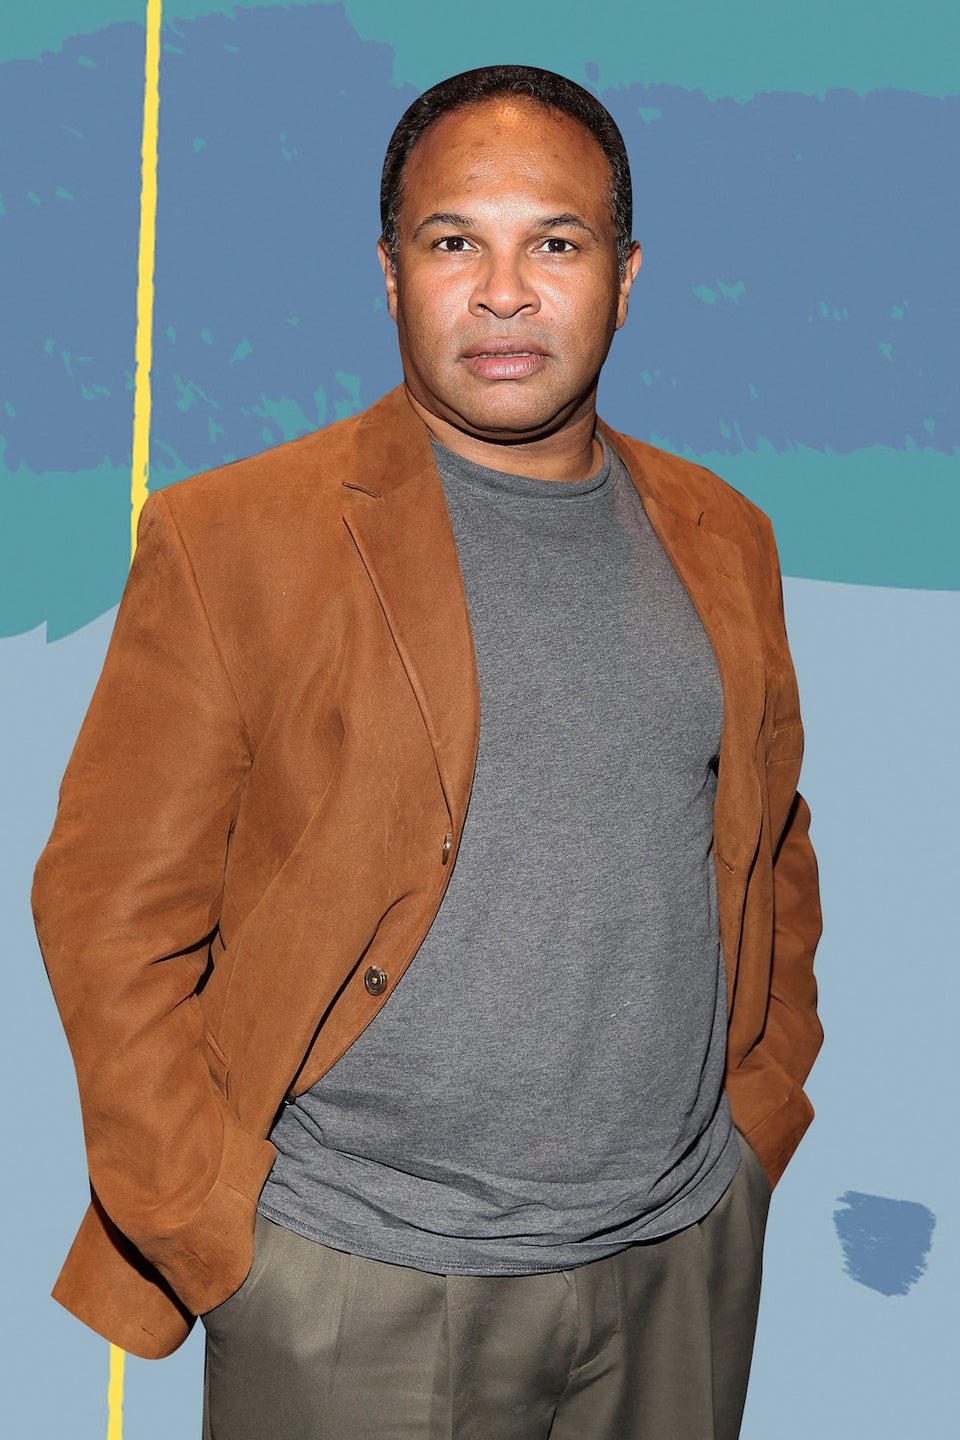 Geoffrey Owens Books Another Acting Gig With ‘NCIS: New Orleans’